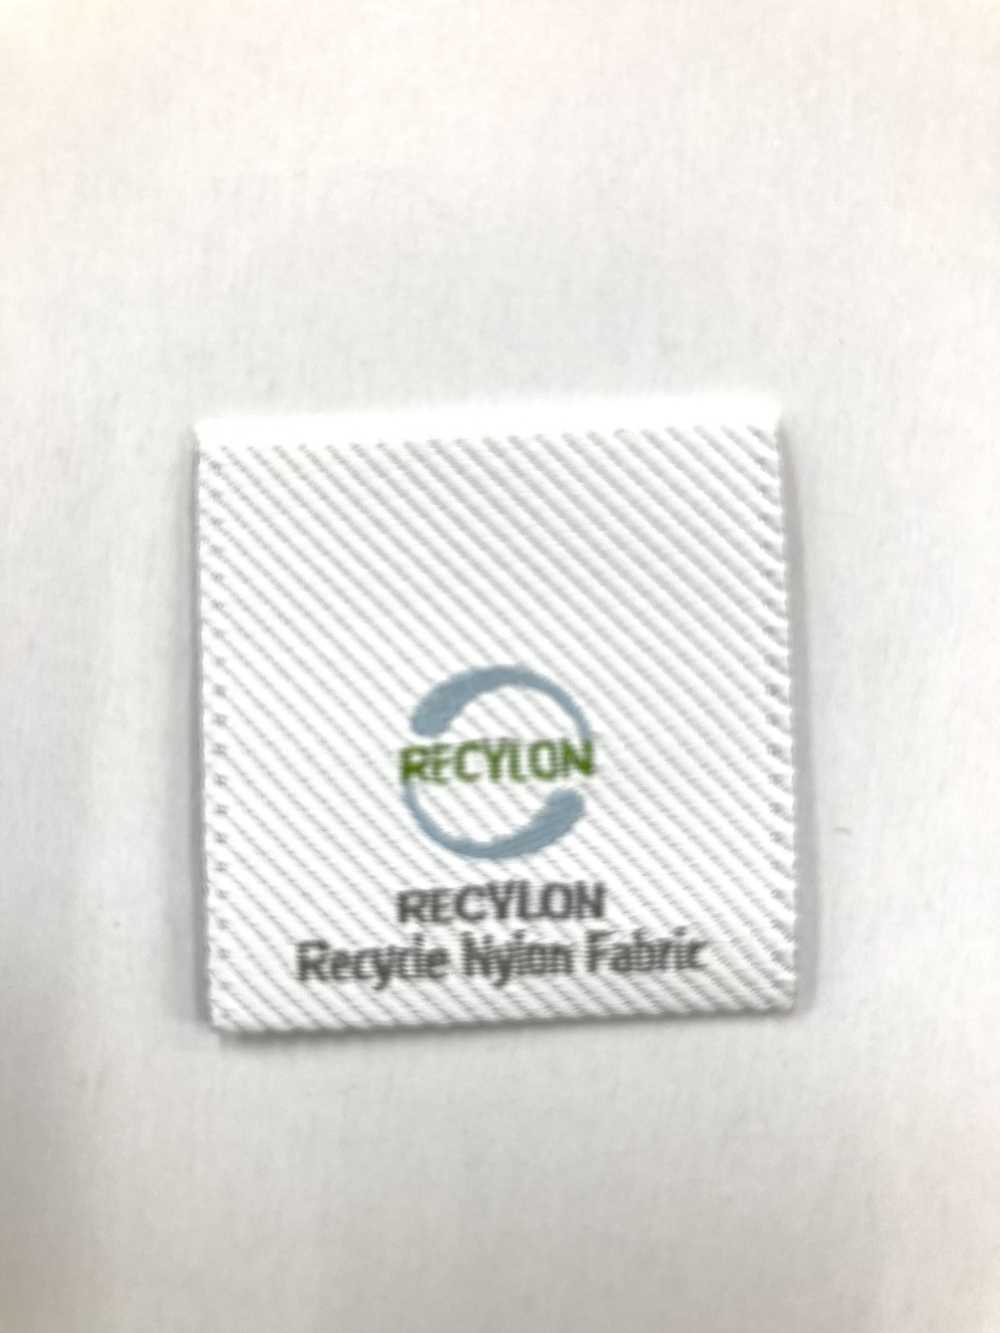 TP004-RYON Recylon Woven Label Labels[Miscellaneous Goods And Others] Top Run